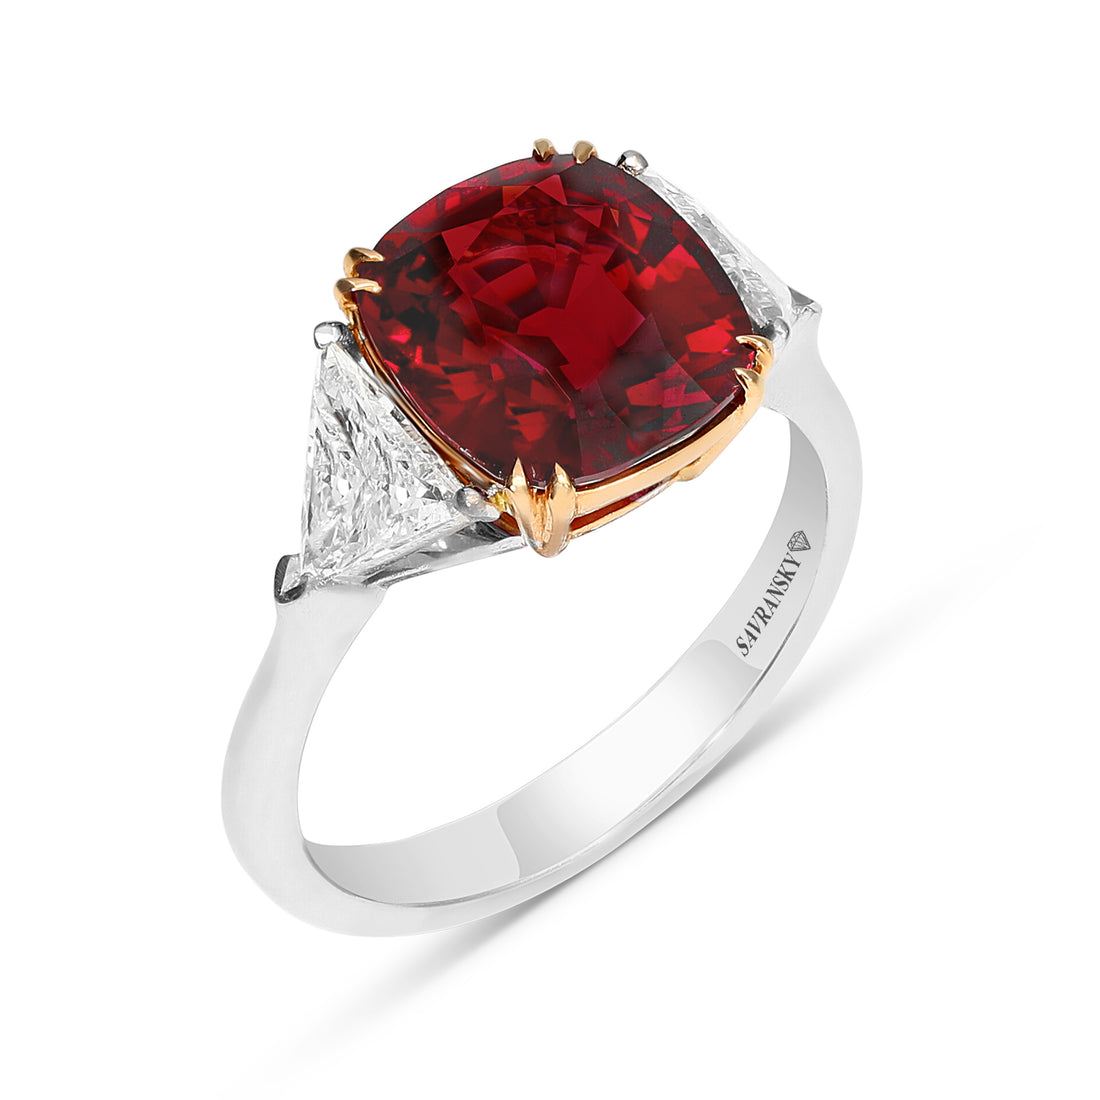 Cushion Cut Red Spinel Ring